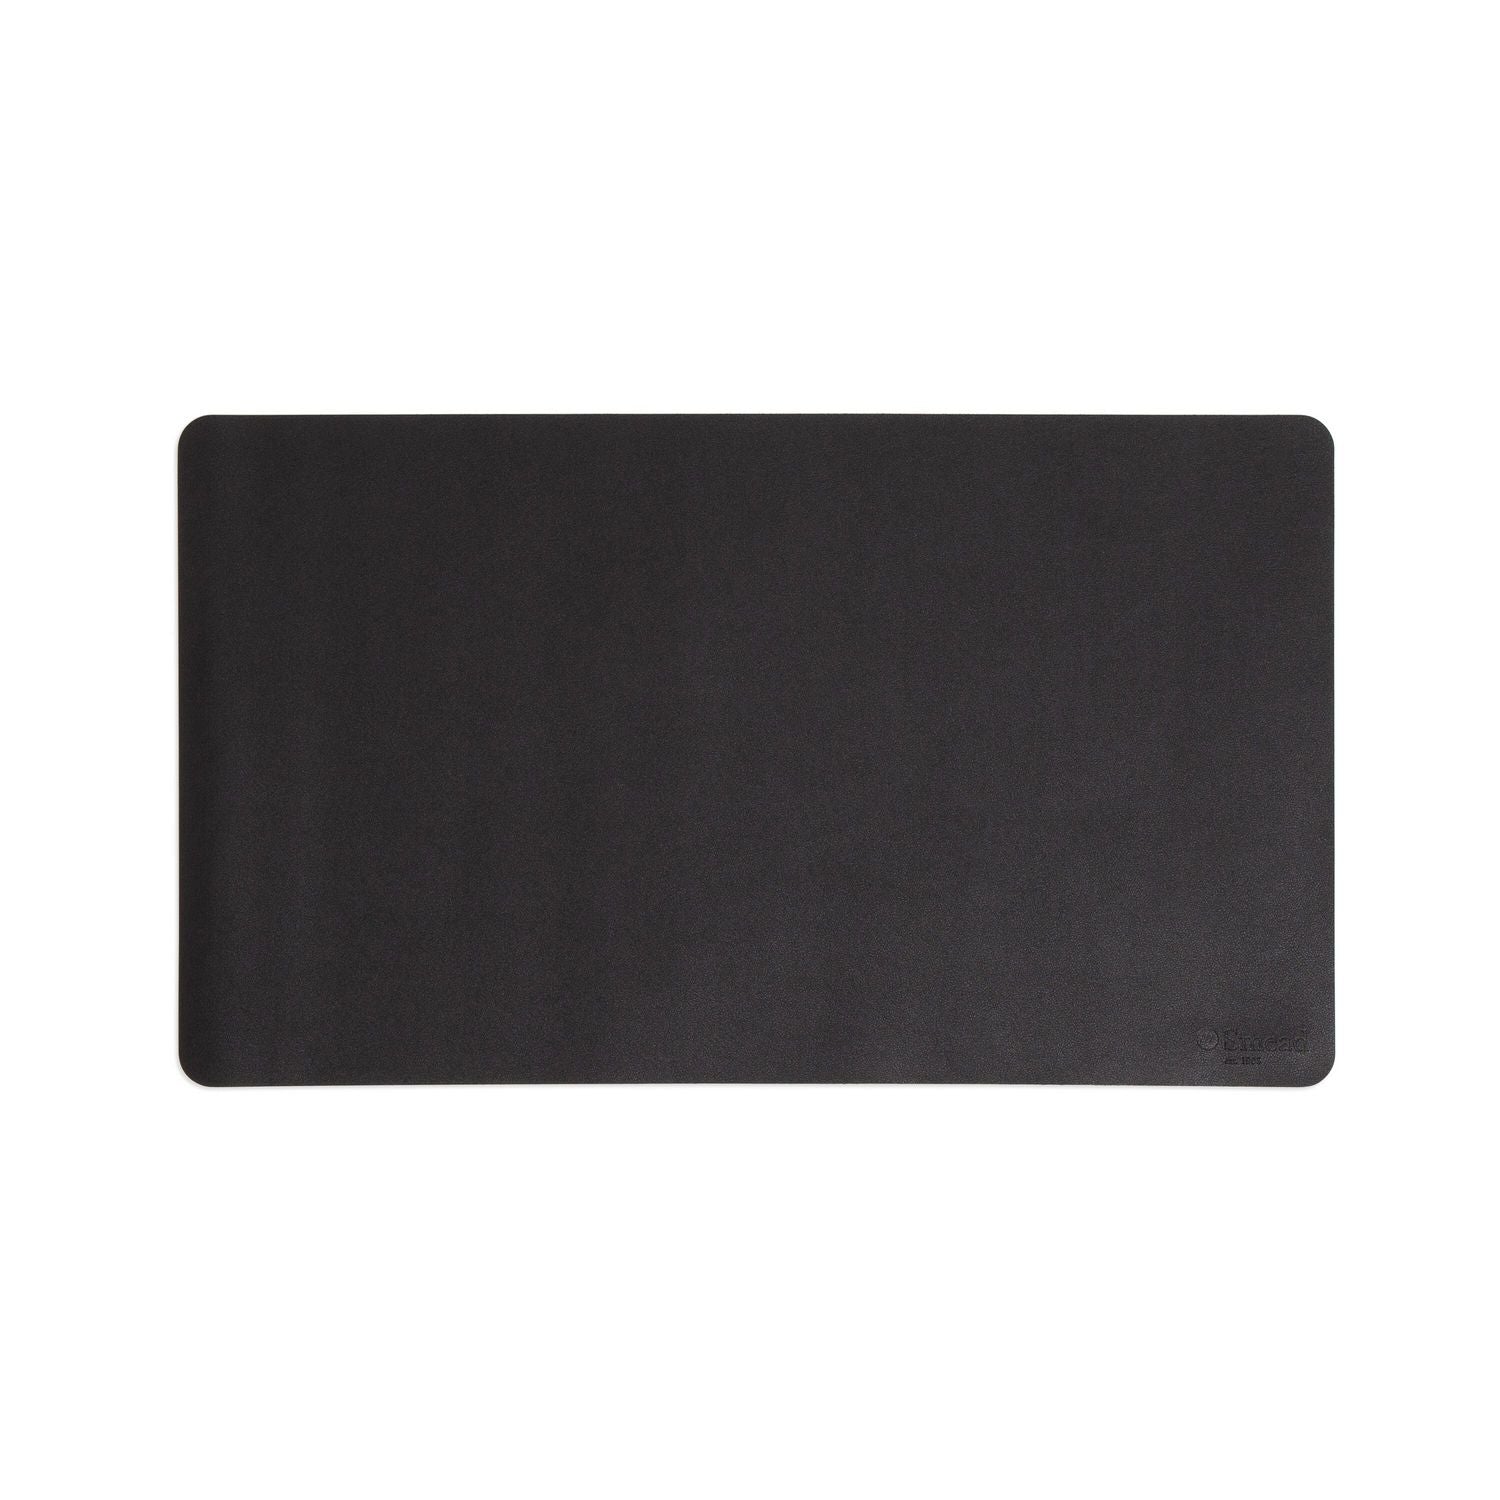 vegan-leather-desk-pads-36-x-17-charcoal_smd64828 - 1